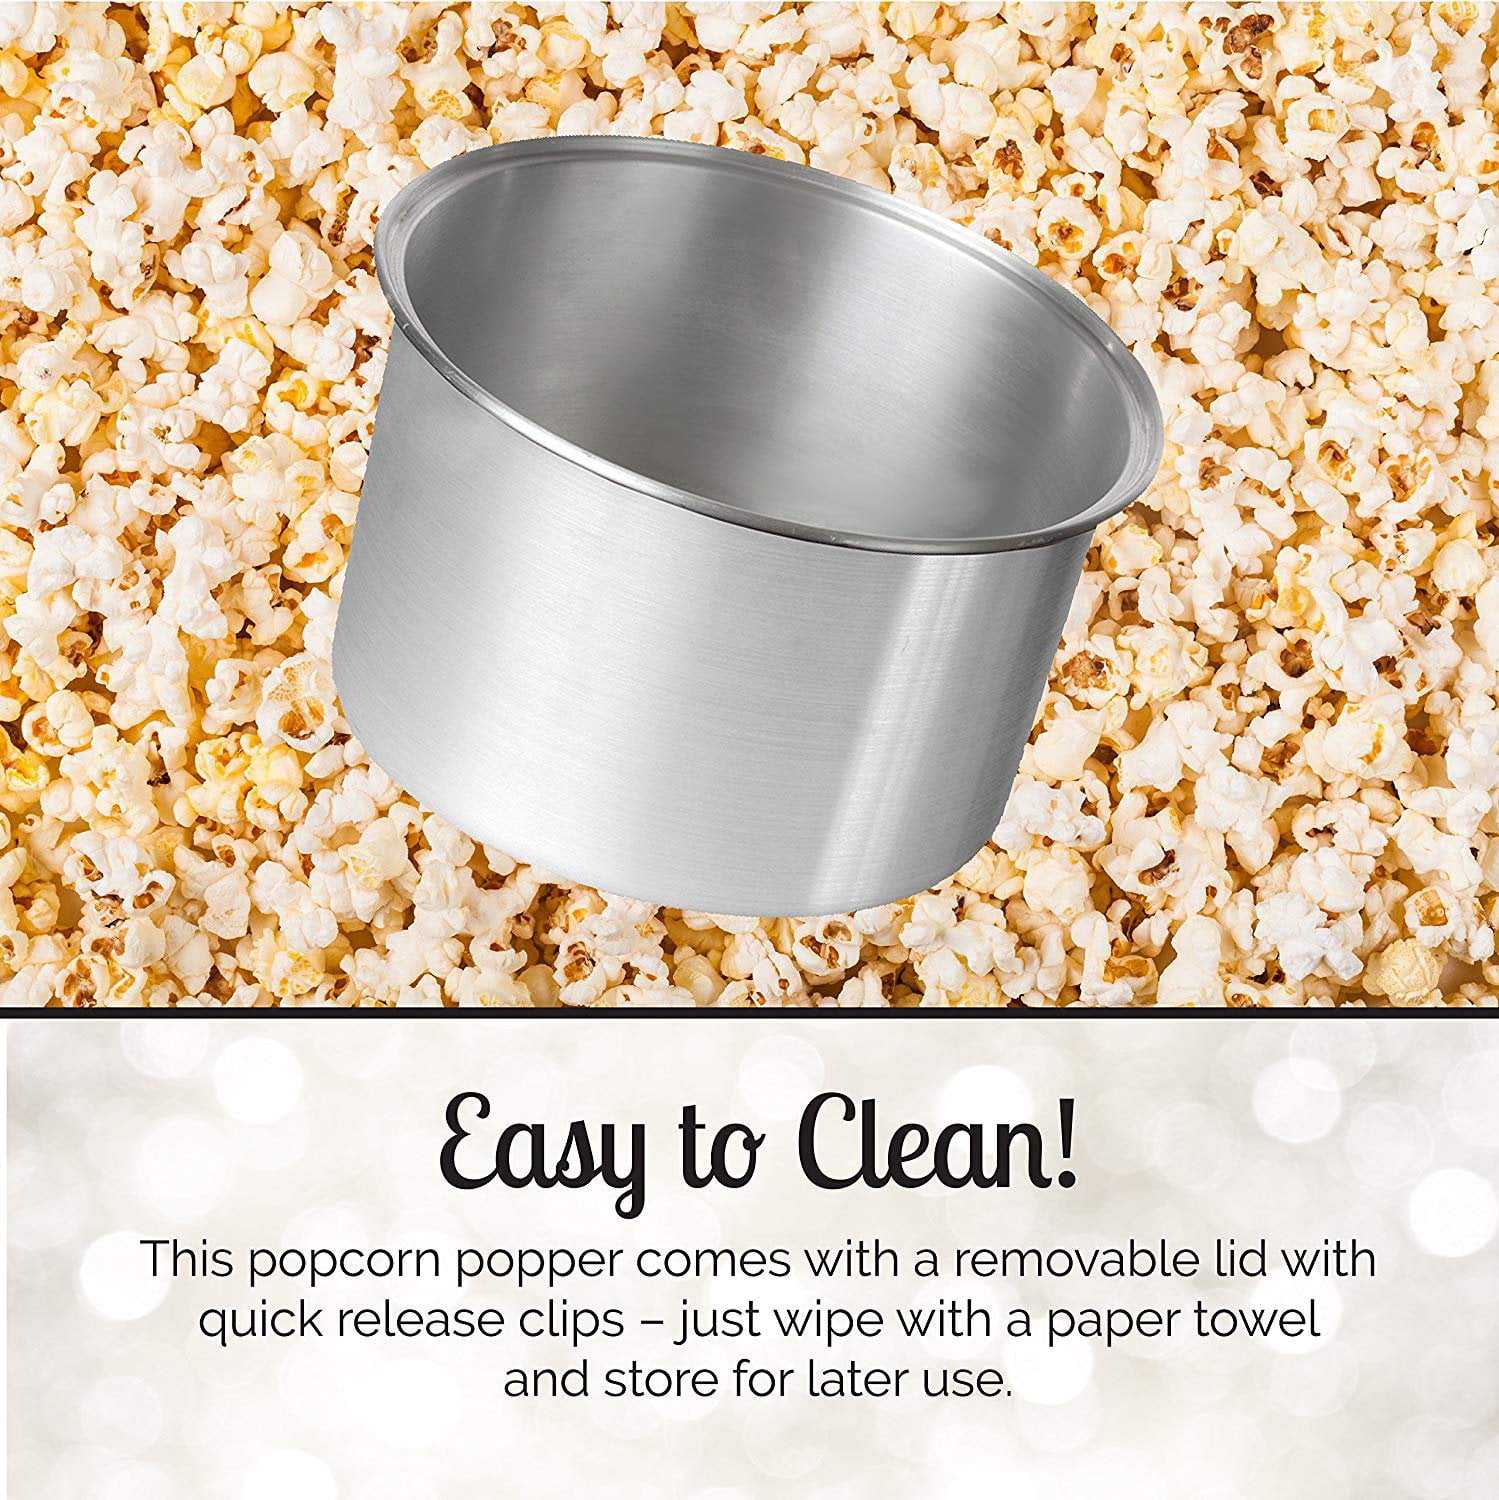 Whirley Pop™ Stovetop Popcorn Popper with Popping Kit